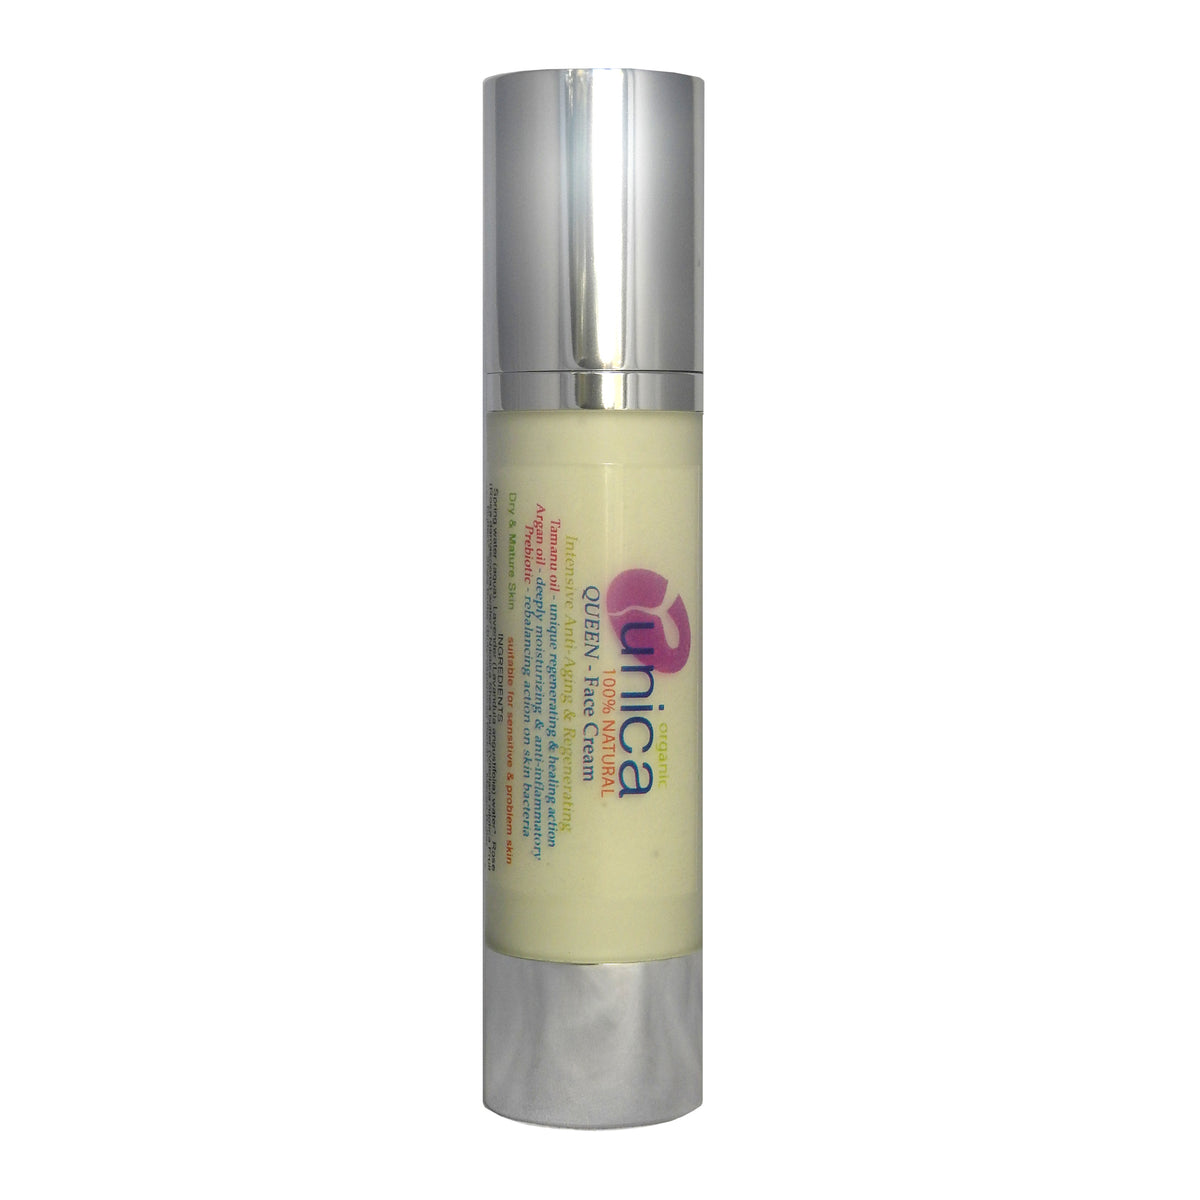 Organic face cream for dry mature skin with Tamanu oil in airless dispenser. Suitable for sensitive skin and eczema.